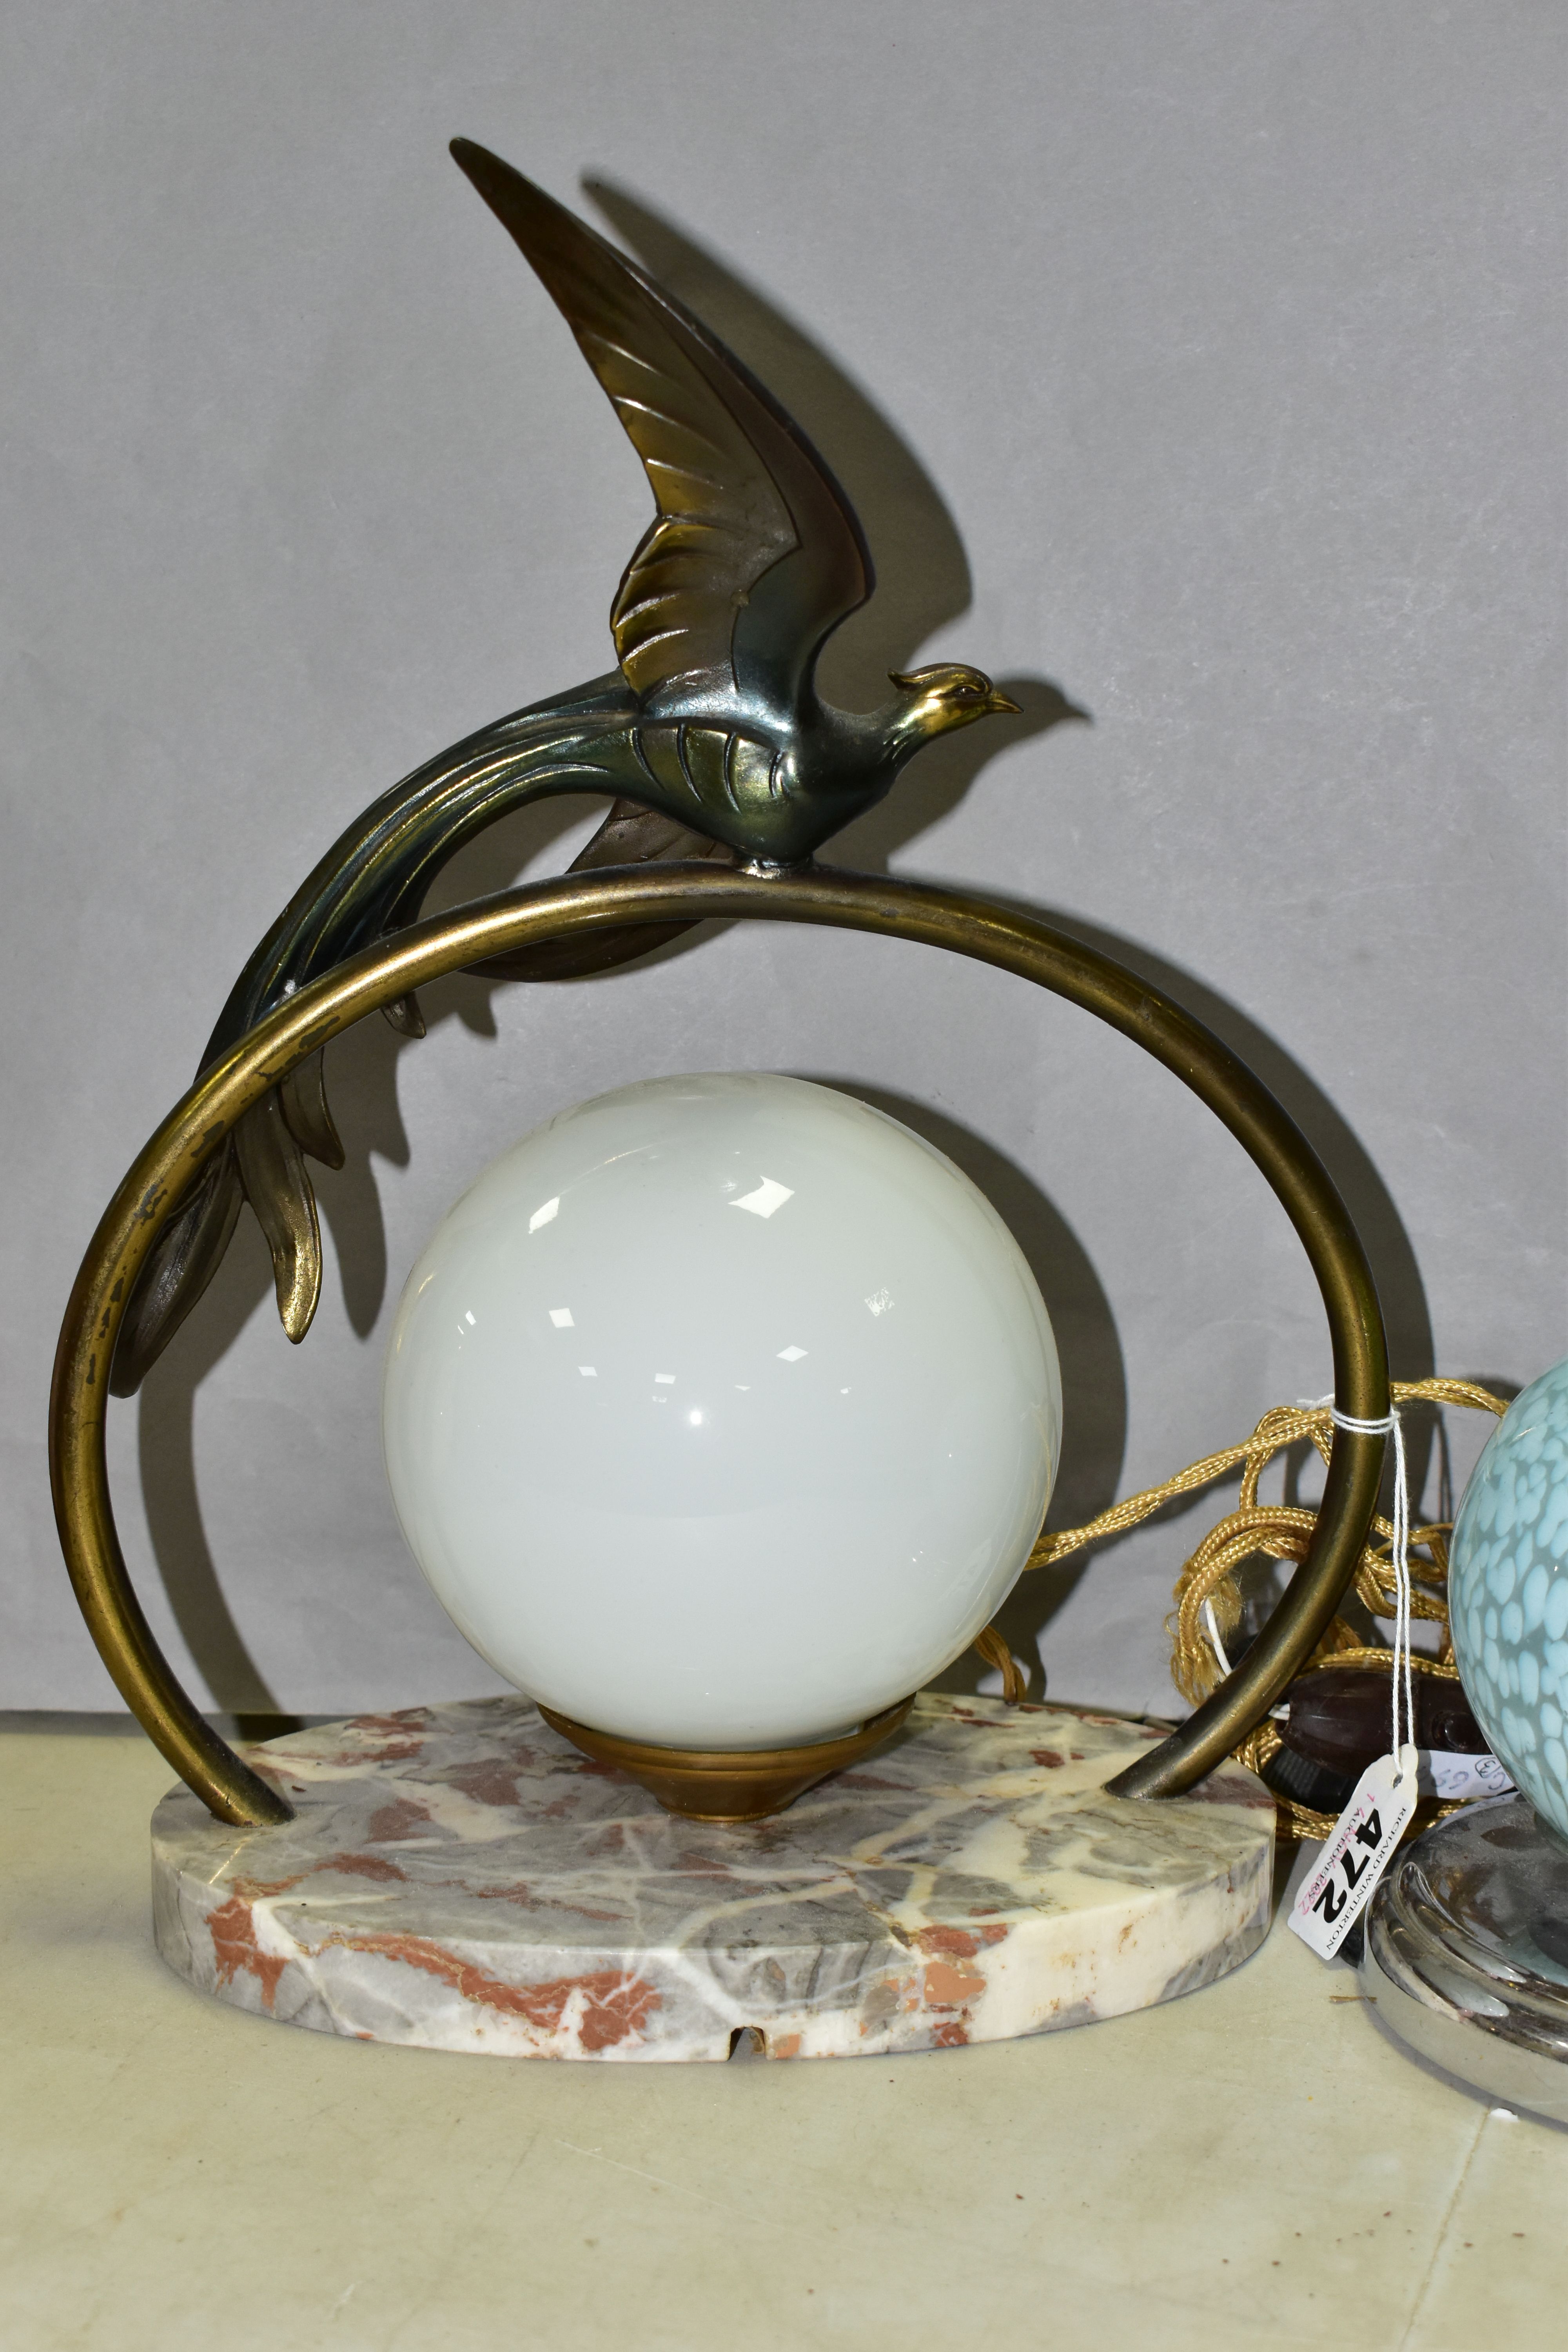 TWO FRENCH ART DECO TABLE LAMPS, one with a white glass spherical shade underneath a brass figure of - Image 5 of 5